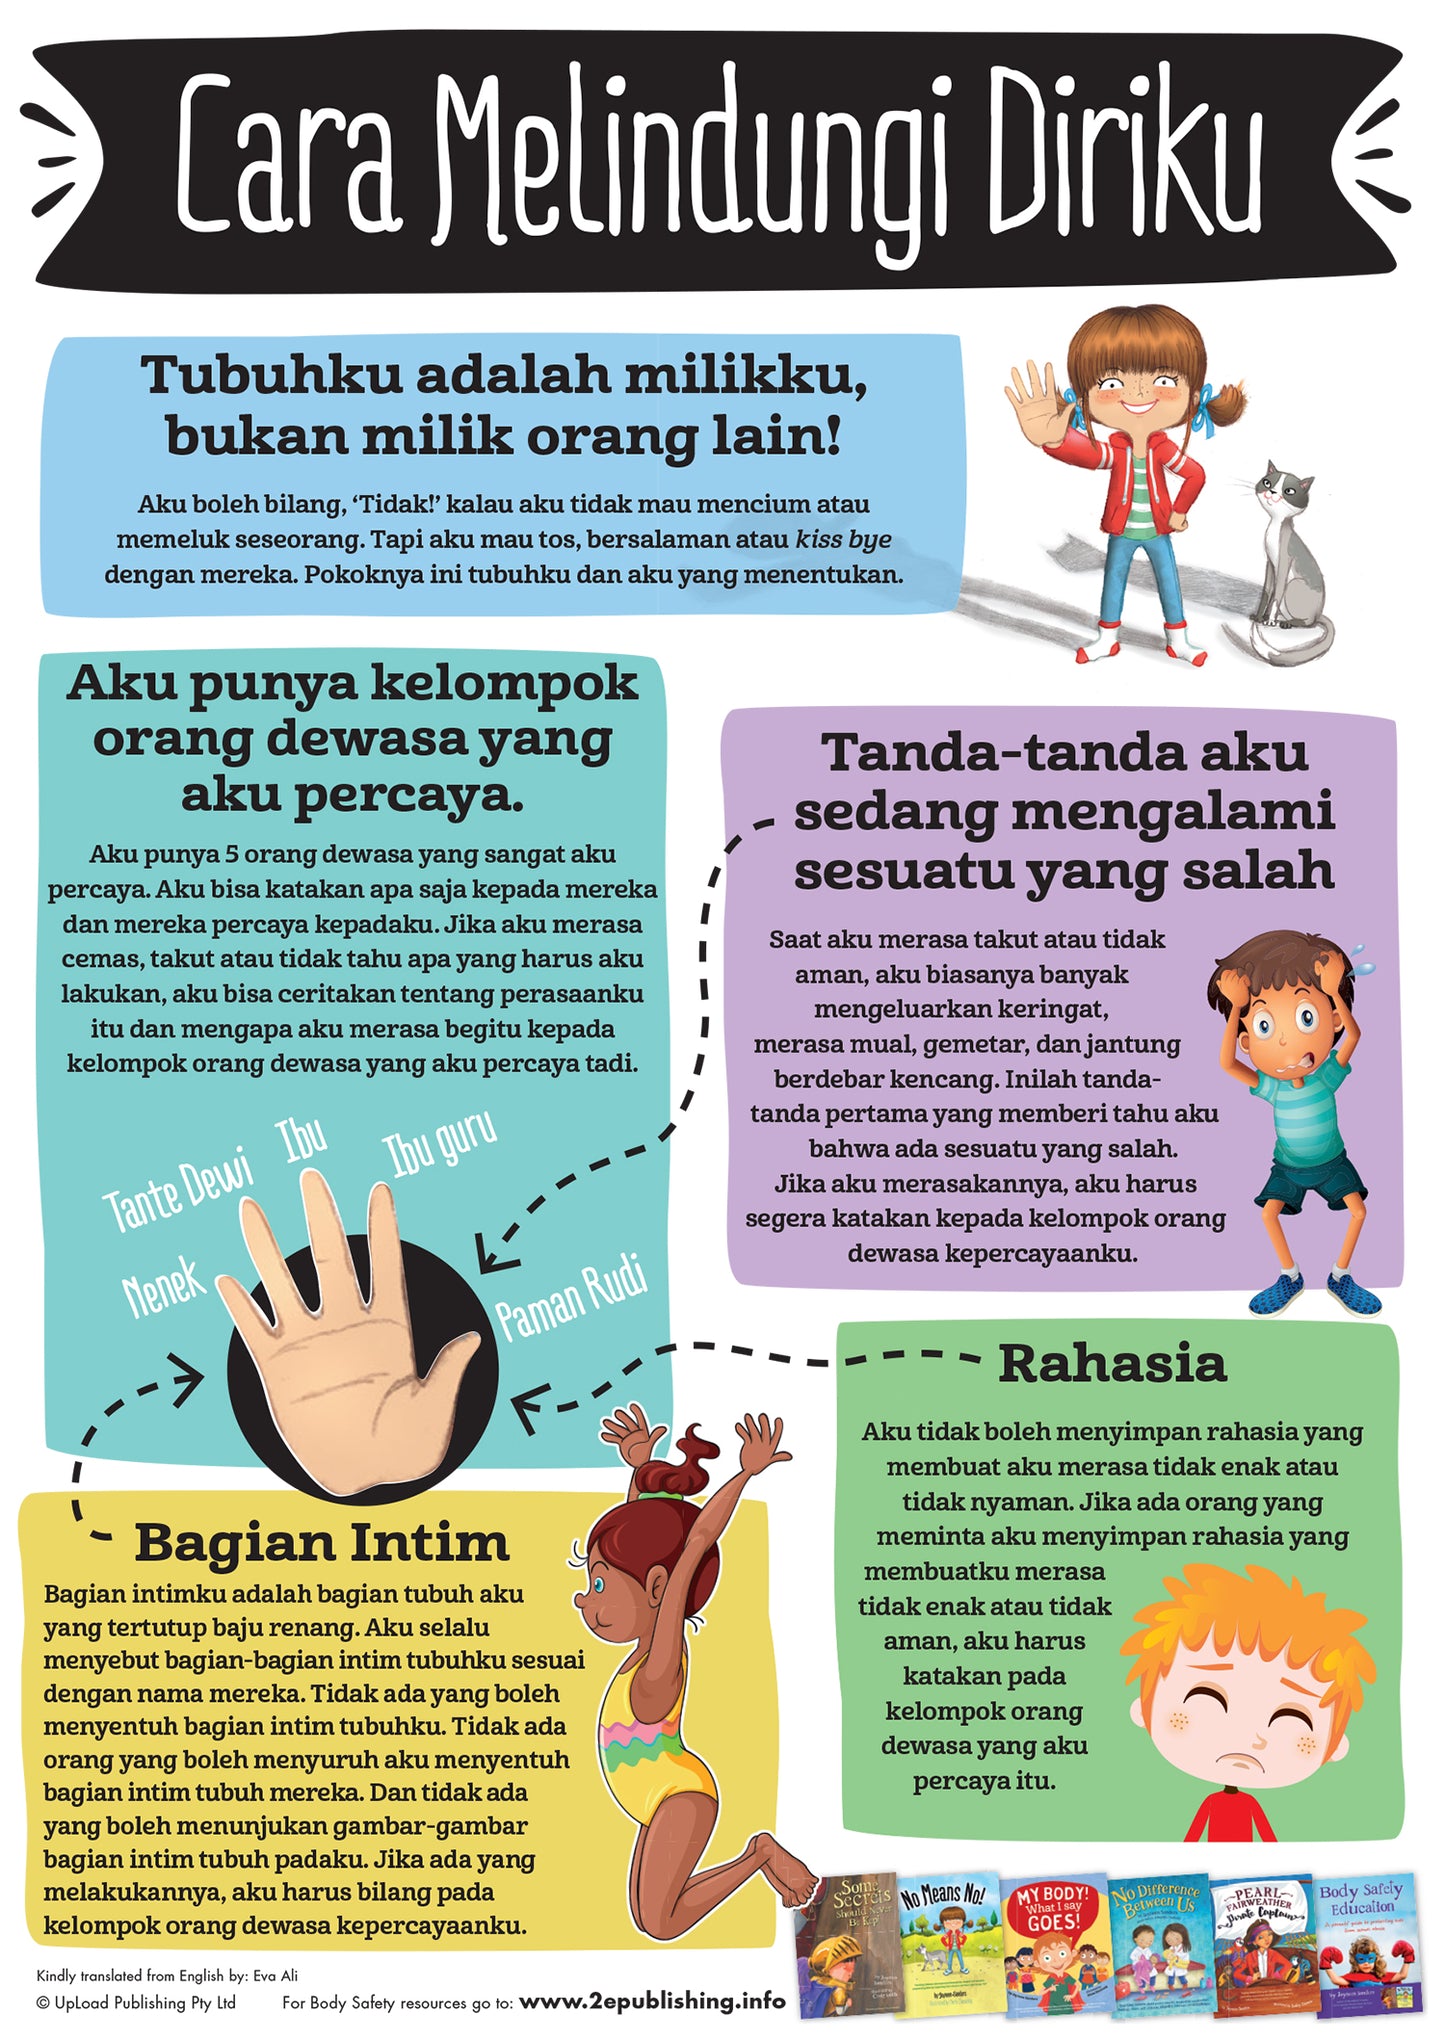 Body Safety Rules poster for children, written in Indonesian.